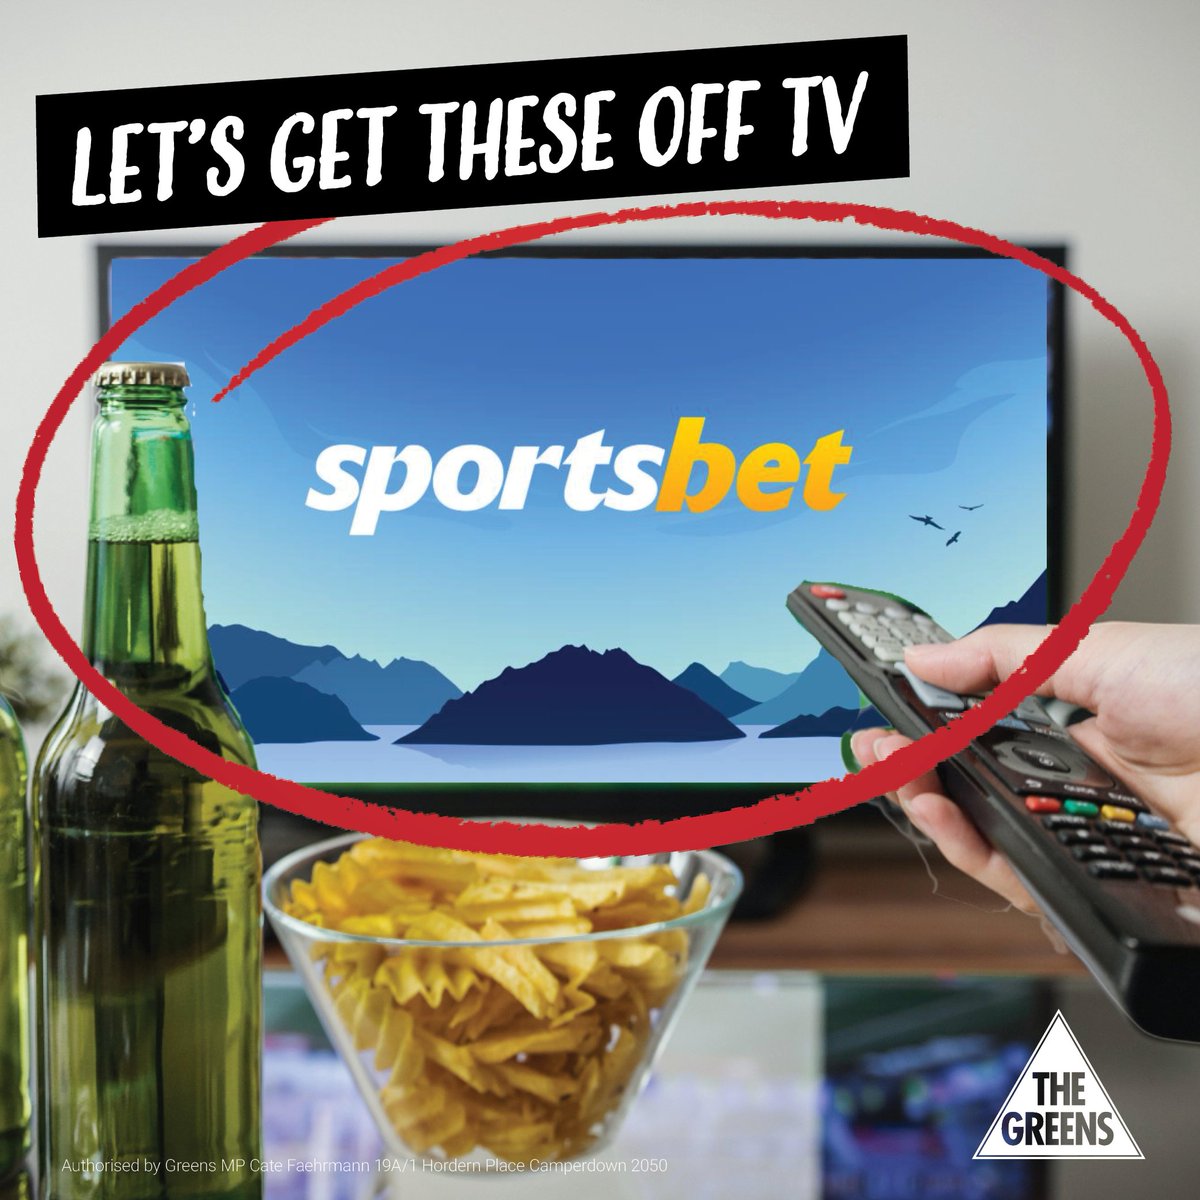 It's time to ban gambling advertising - during TV, on billboards,...